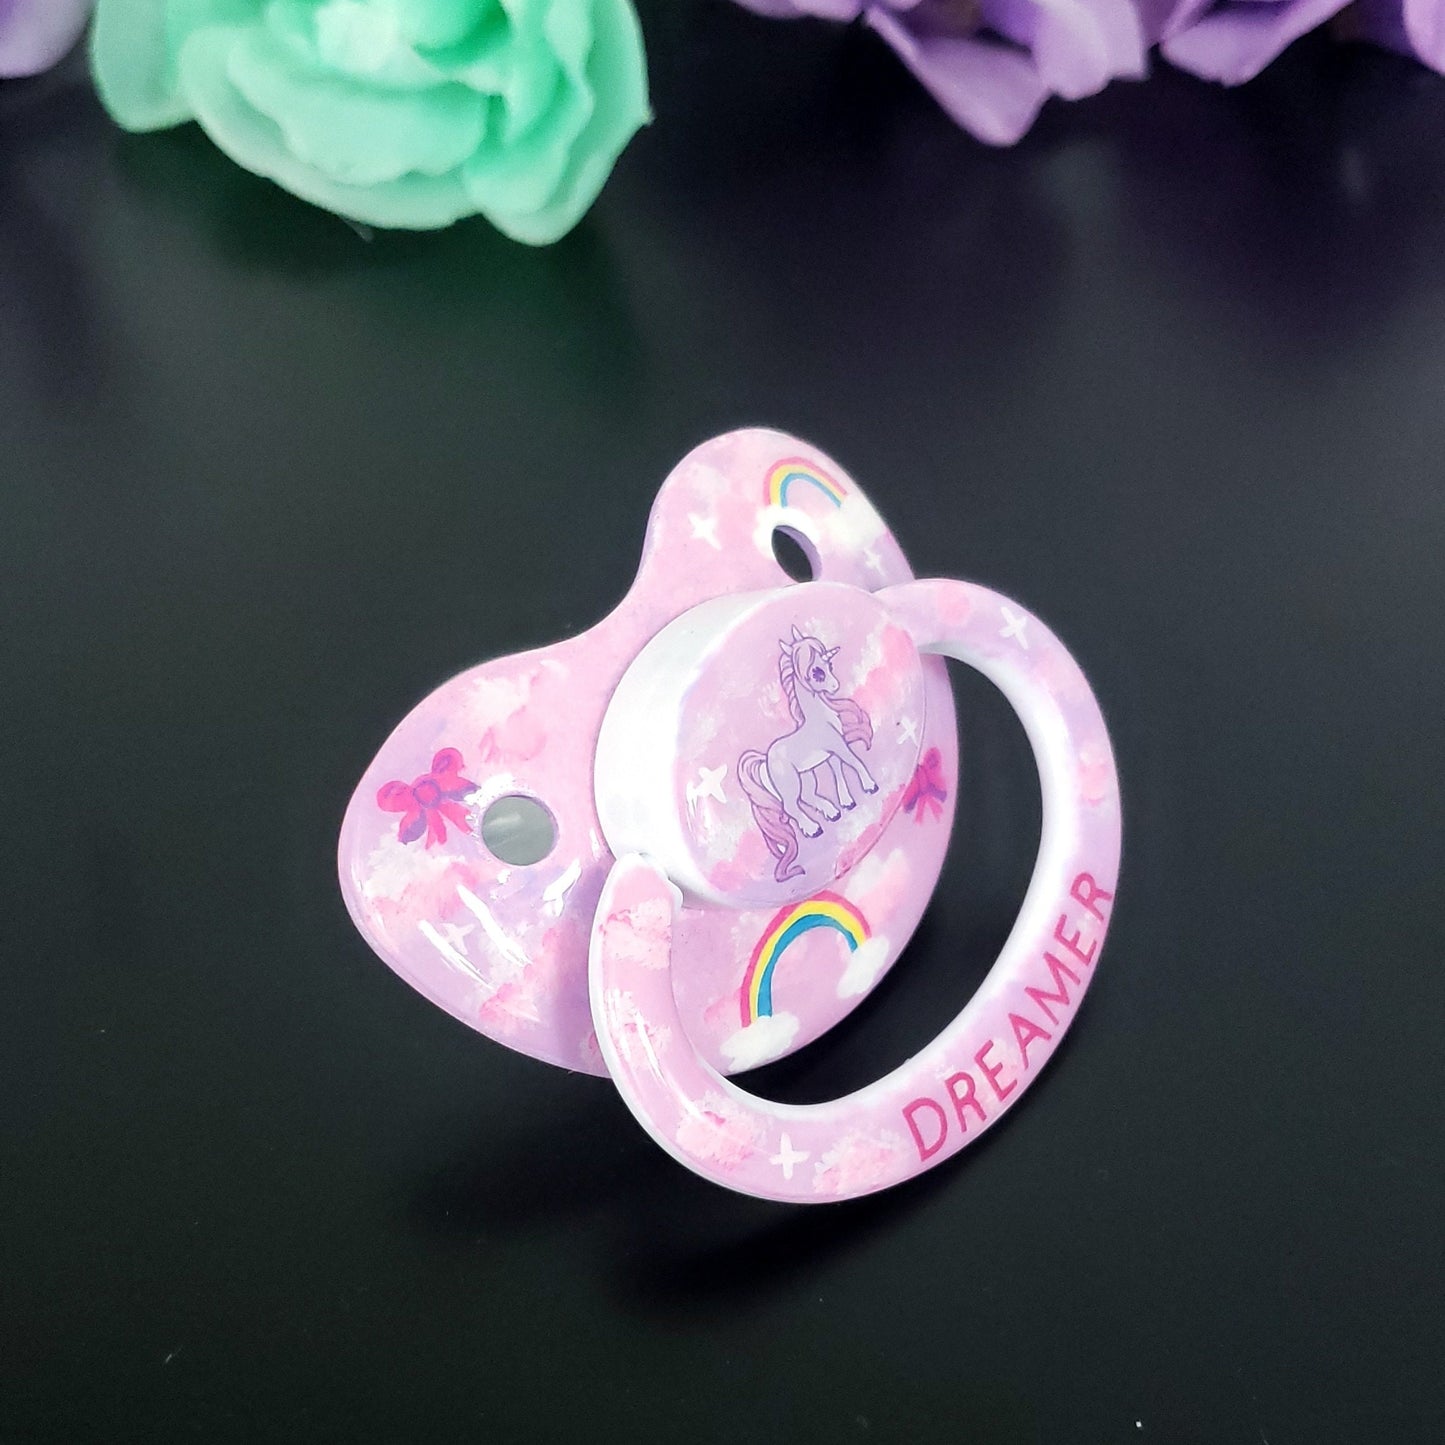 Hand Painted Adult Pacifier - Dreamer